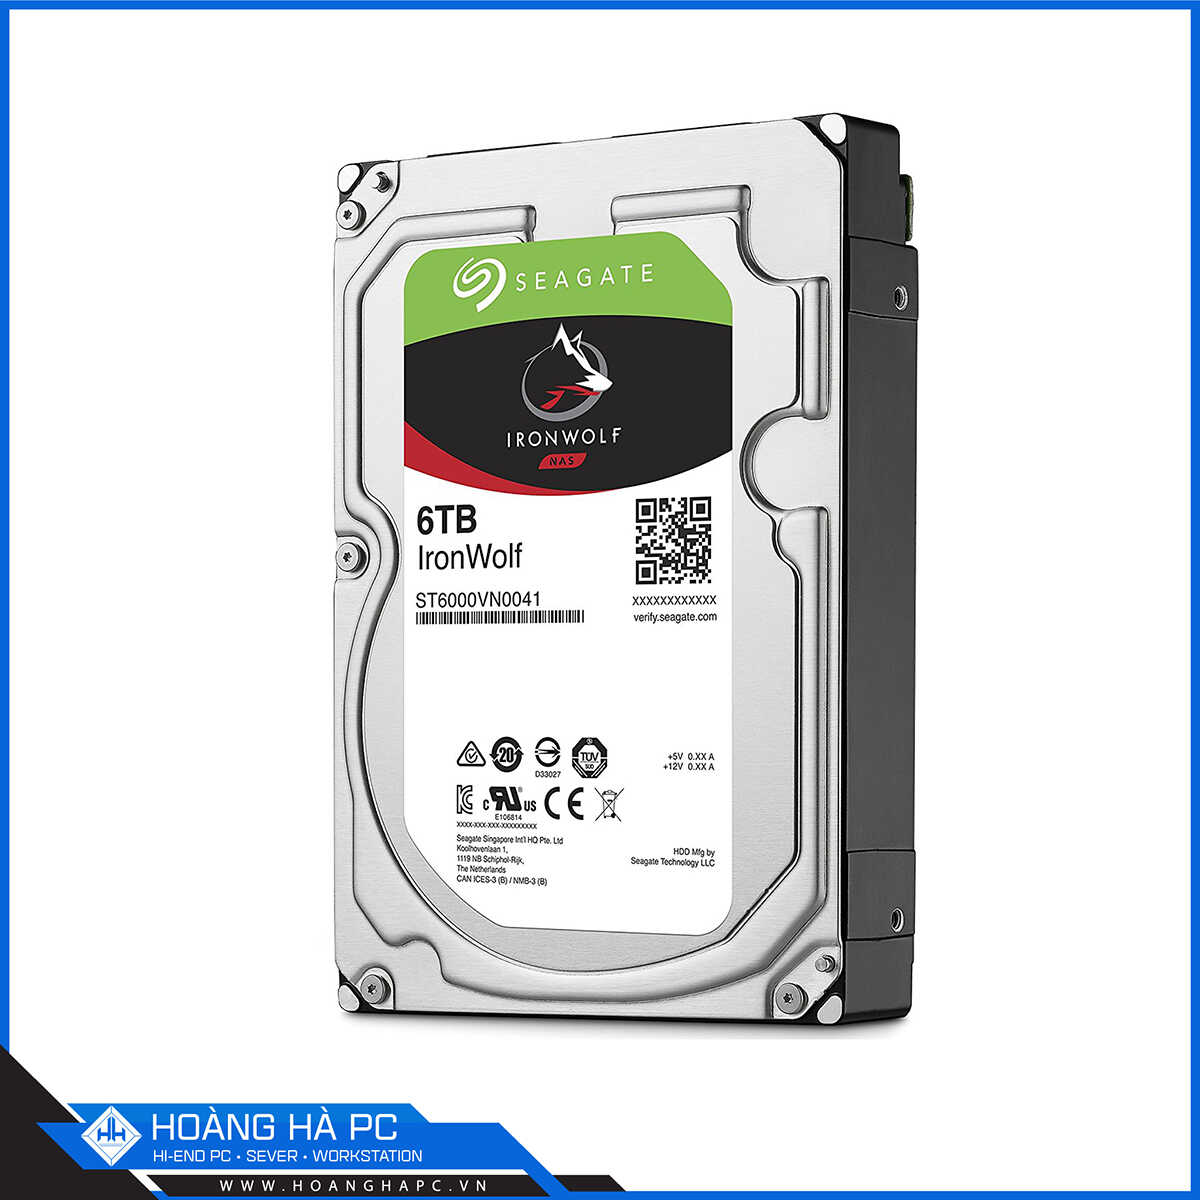 Ổ Cứng HDD Seagate IRONWOLF 6TB (3.5 inch, SATA3 6Gb/s, 128MB Cache, 5400rpm)